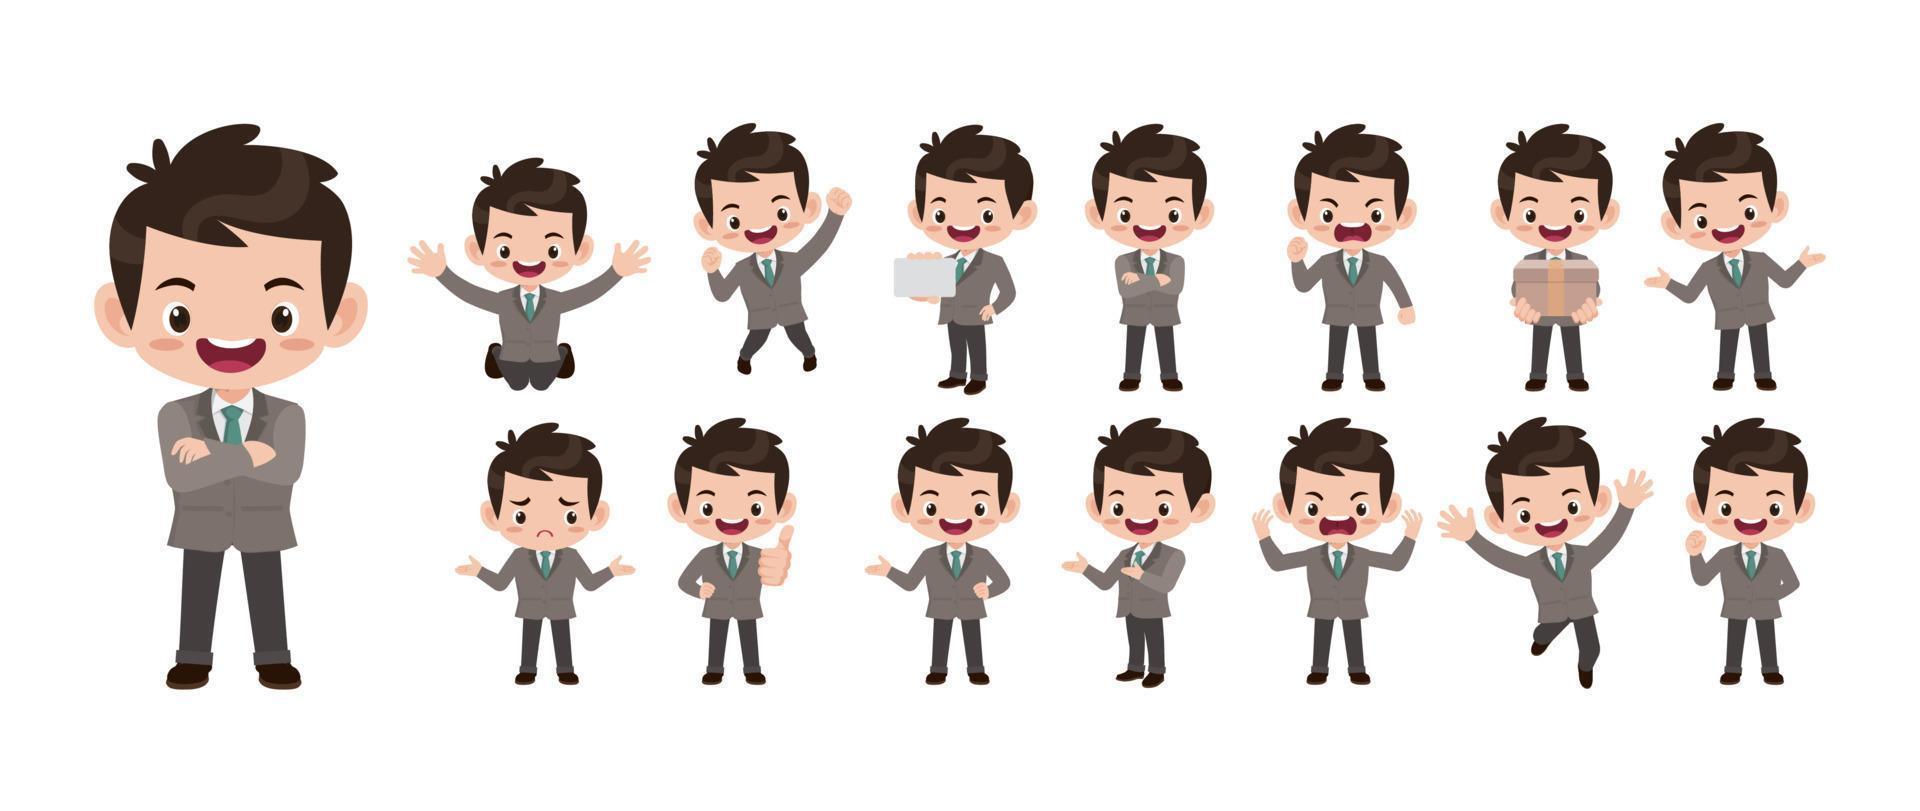 Set of people with different poses vector